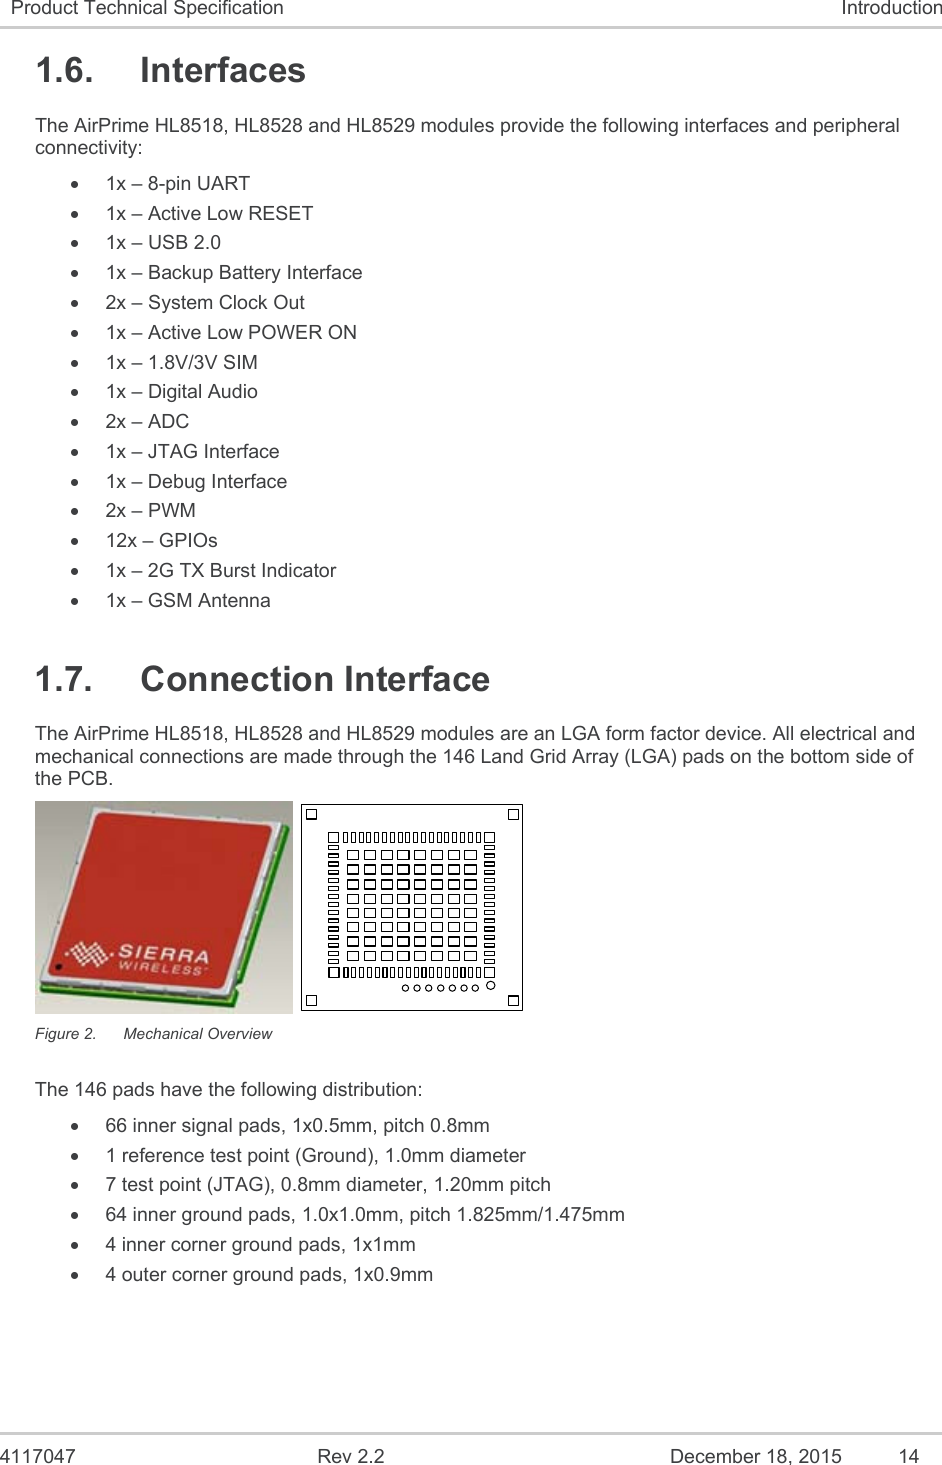  4117047  Rev 2.2  December 18, 2015  14 Product Technical Specification  Introduction 1.6.  Interfaces The AirPrime HL8518, HL8528 and HL8529 modules provide the following interfaces and peripheral connectivity:   1x – 8-pin UART   1x – Active Low RESET   1x – USB 2.0   1x – Backup Battery Interface   2x – System Clock Out   1x – Active Low POWER ON   1x – 1.8V/3V SIM   1x – Digital Audio  2x – ADC   1x – JTAG Interface   1x – Debug Interface  2x – PWM  12x – GPIOs    1x – 2G TX Burst Indicator   1x – GSM Antenna 1.7.  Connection Interface The AirPrime HL8518, HL8528 and HL8529 modules are an LGA form factor device. All electrical and mechanical connections are made through the 146 Land Grid Array (LGA) pads on the bottom side of the PCB.   Figure 2.  Mechanical Overview The 146 pads have the following distribution:   66 inner signal pads, 1x0.5mm, pitch 0.8mm   1 reference test point (Ground), 1.0mm diameter   7 test point (JTAG), 0.8mm diameter, 1.20mm pitch   64 inner ground pads, 1.0x1.0mm, pitch 1.825mm/1.475mm   4 inner corner ground pads, 1x1mm   4 outer corner ground pads, 1x0.9mm 